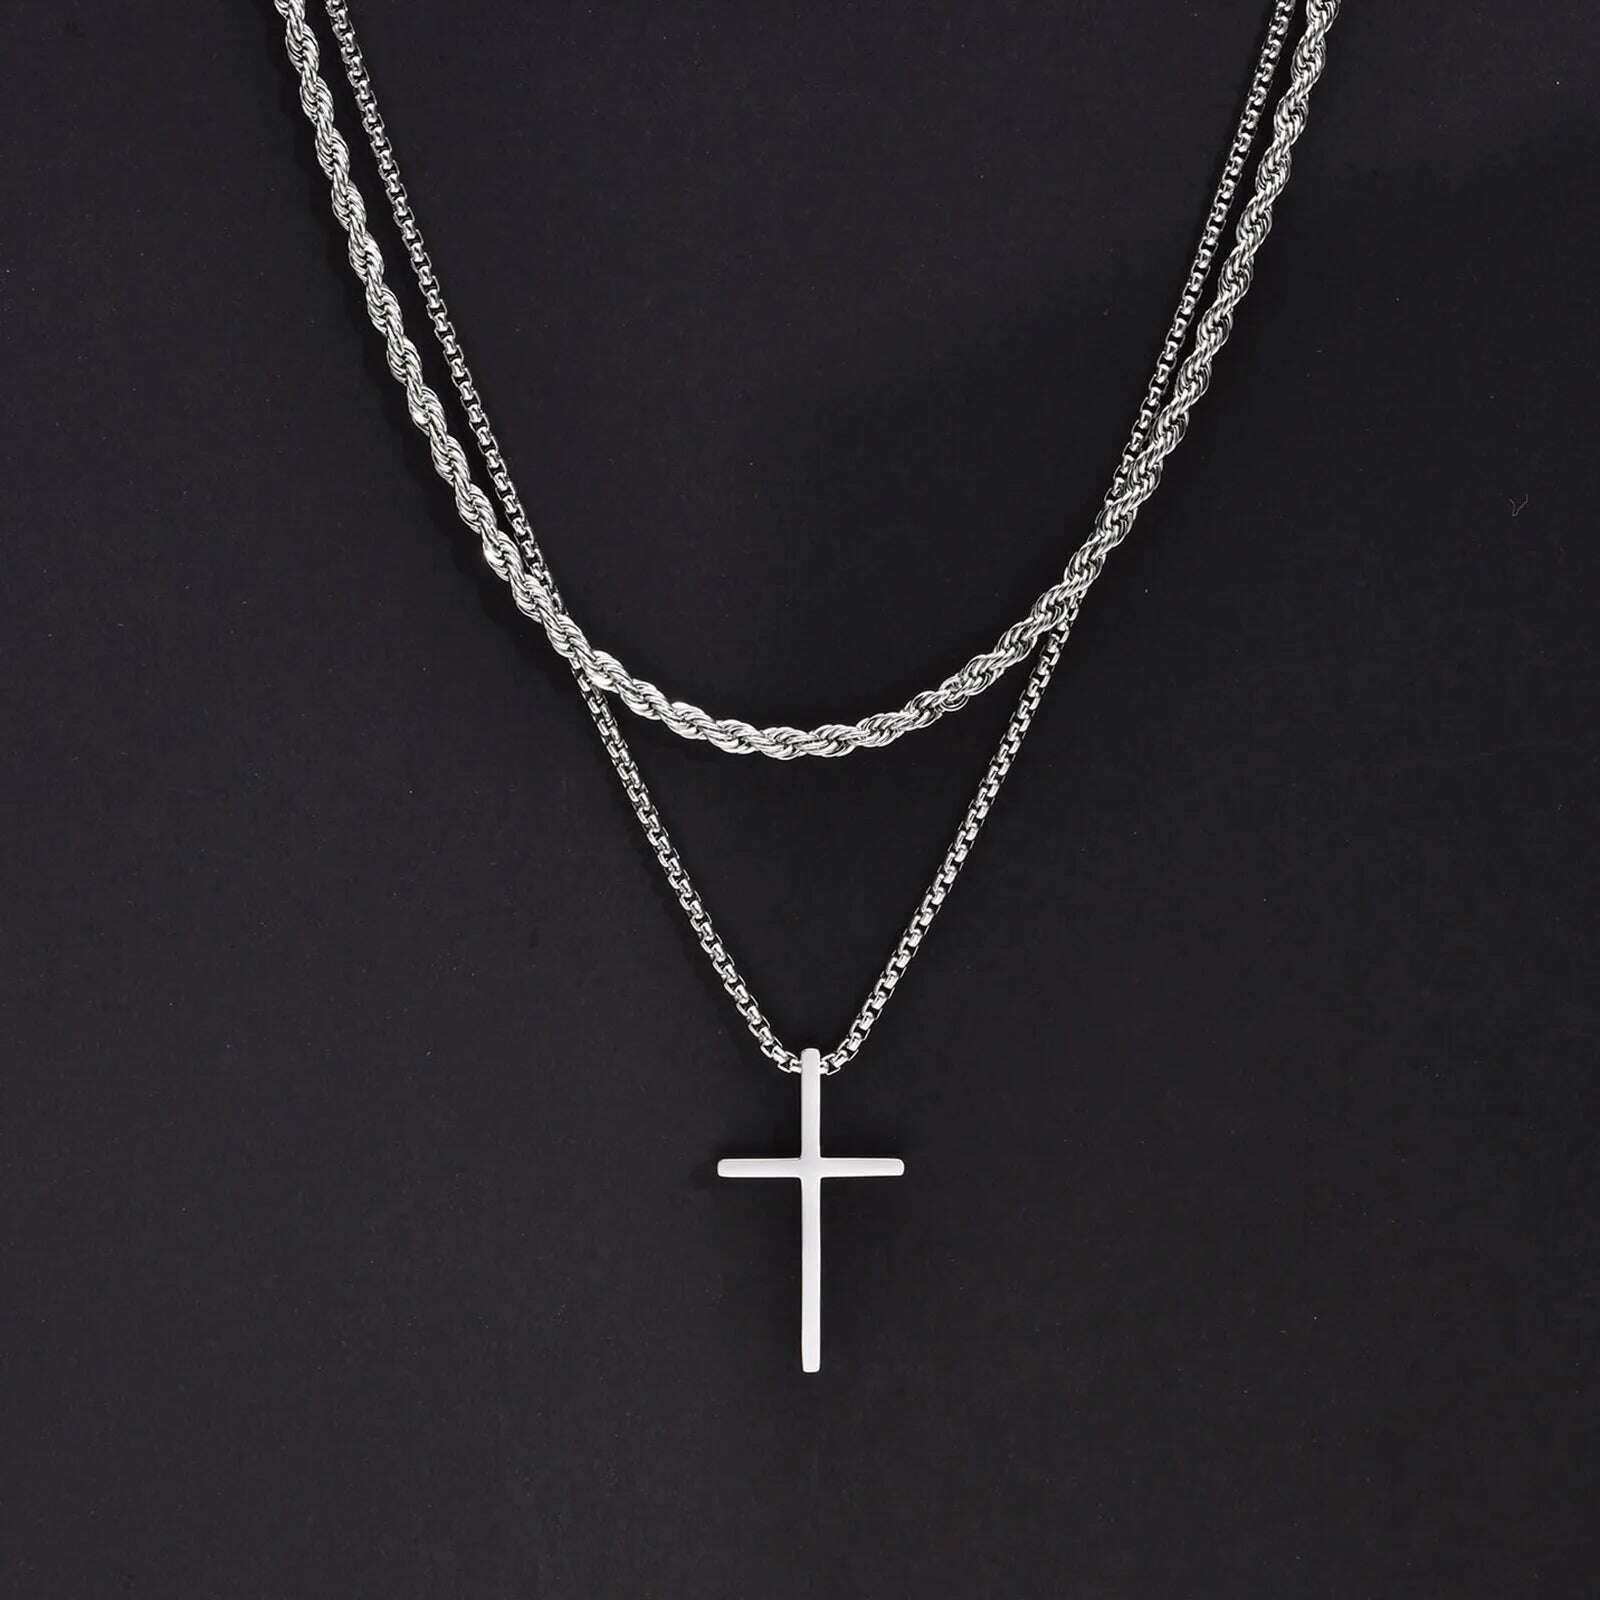 KIMLUD, Vnox Mens Cross Necklaces, Stainless Steel Layered Plain Cross Pendant, Rope Box Chain Necklace, Simple Prayer Jesus Collar, NC-1035S NC-039-55S, KIMLUD Women's Clothes